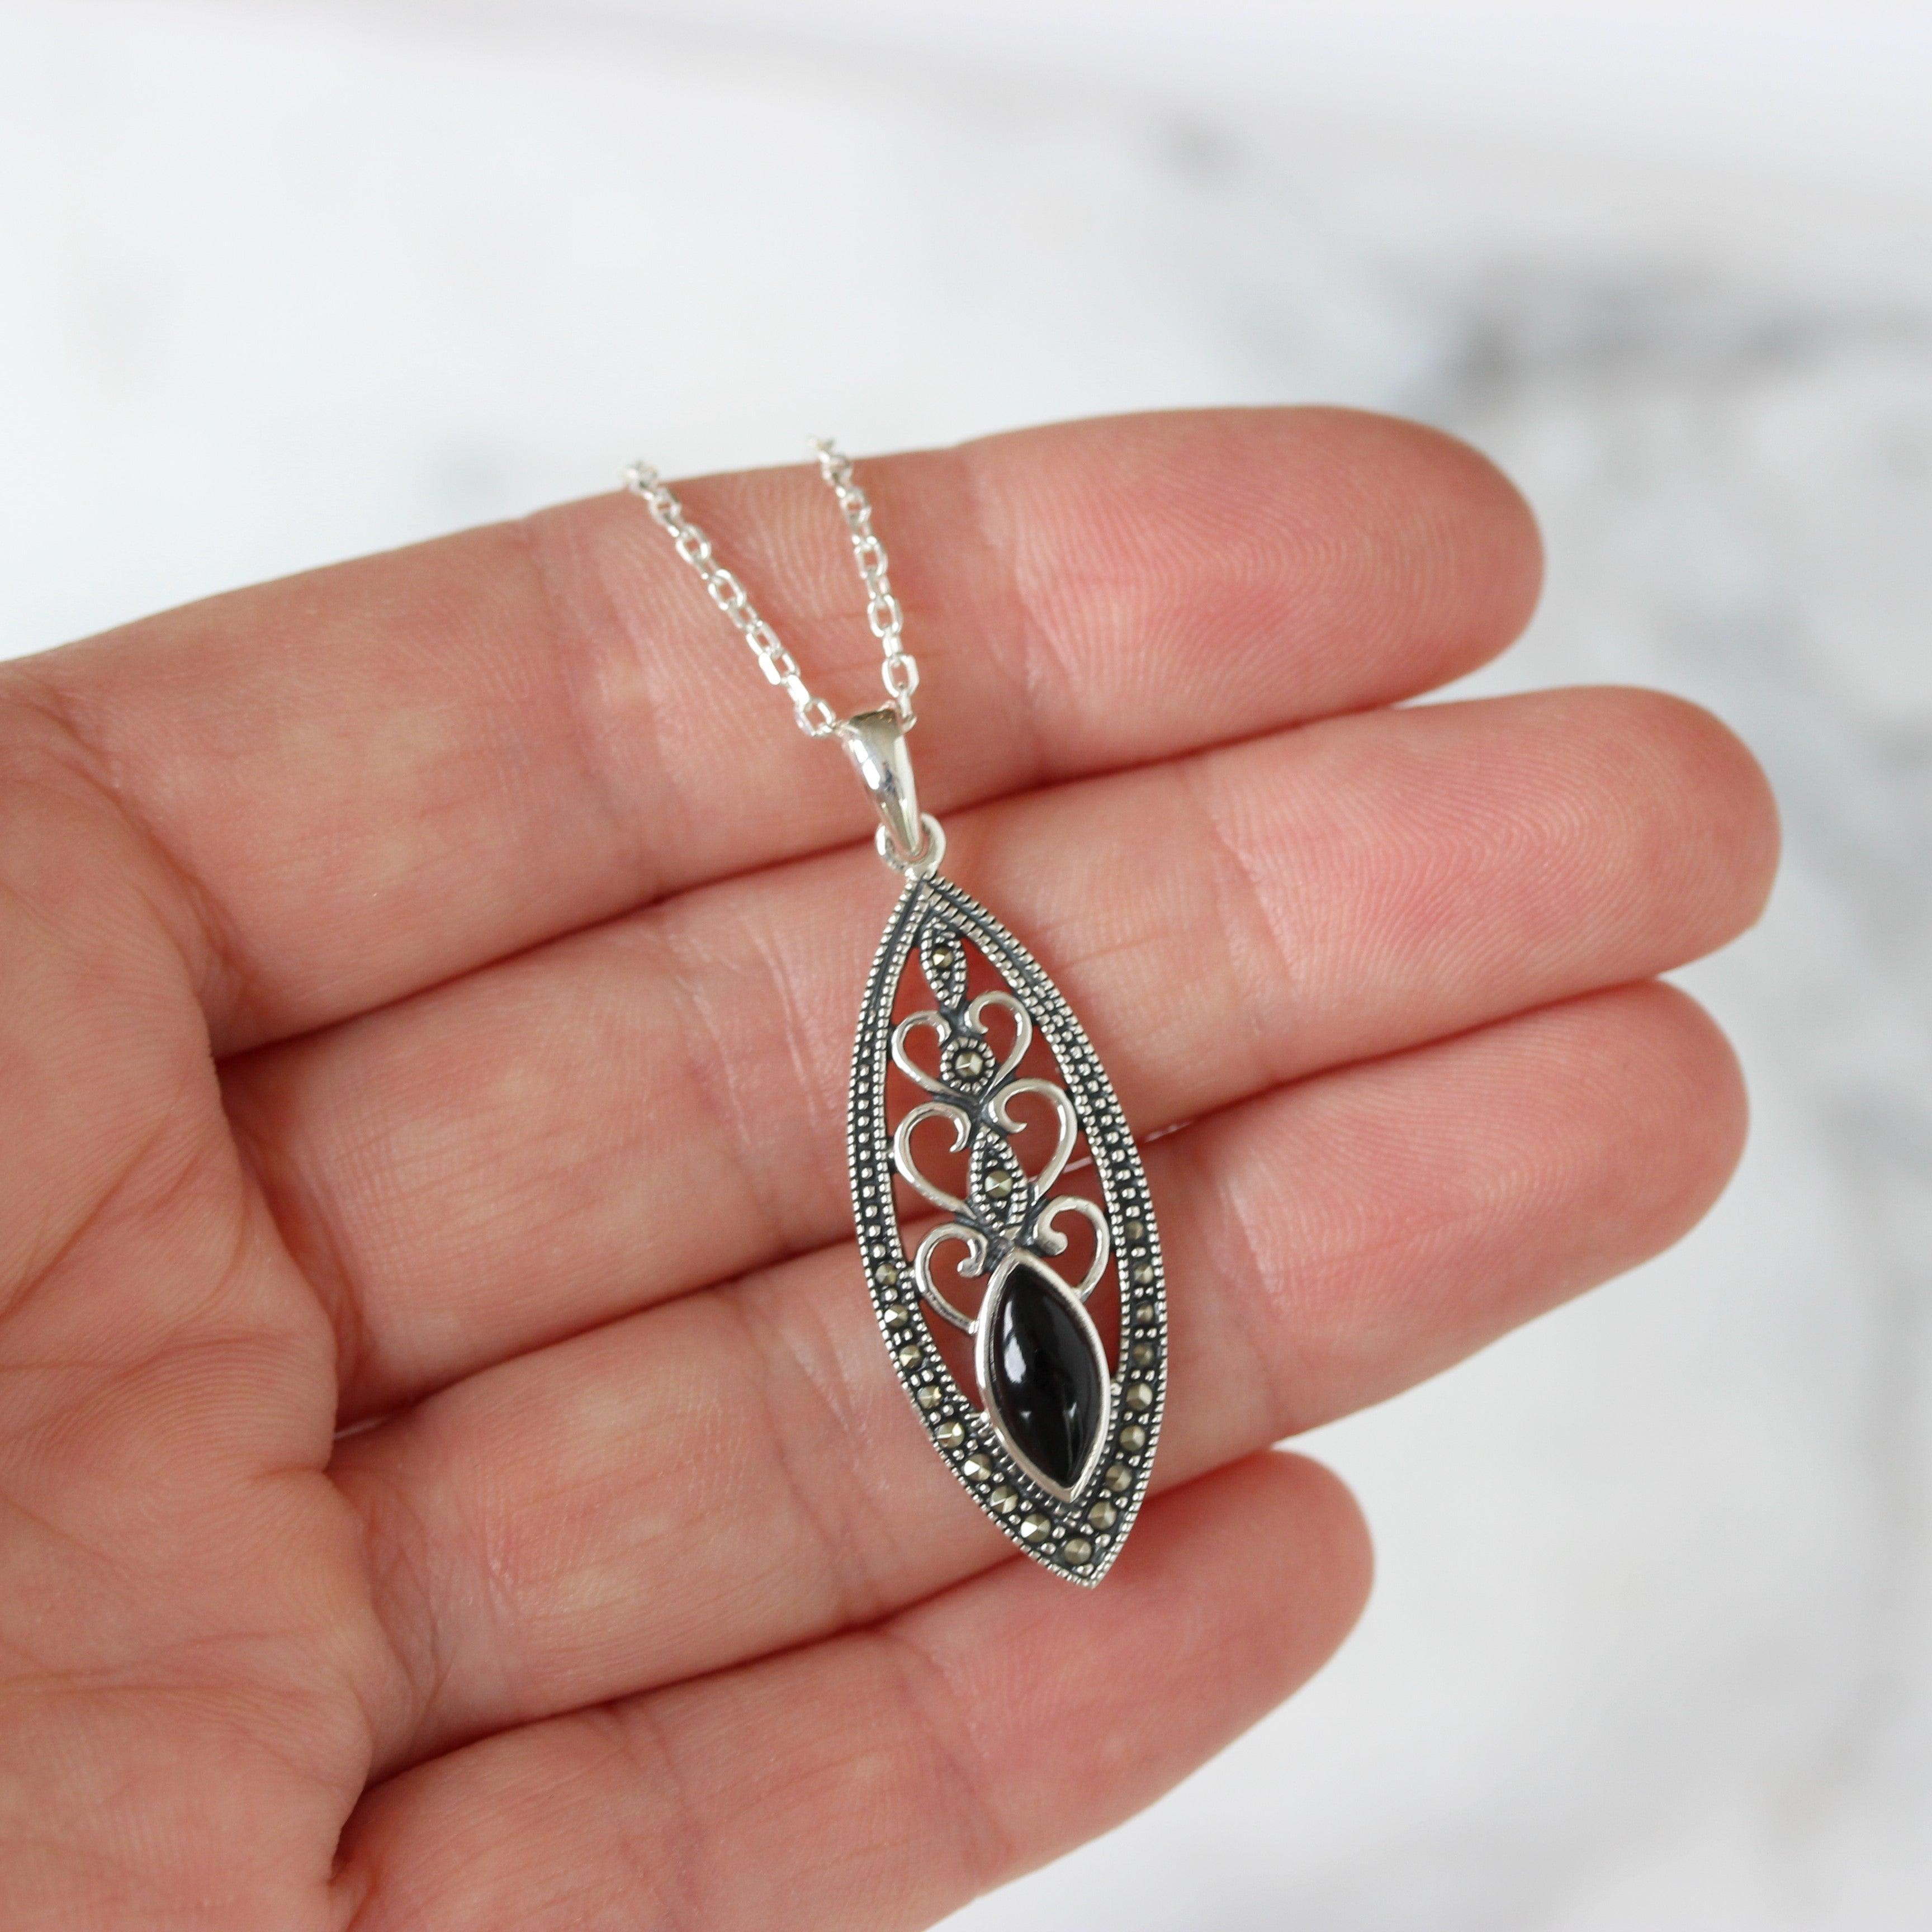 Sterling Silver Marcasite & Black Onyx Marquise Shape Pendant Necklace - STERLING SILVER DESIGNS